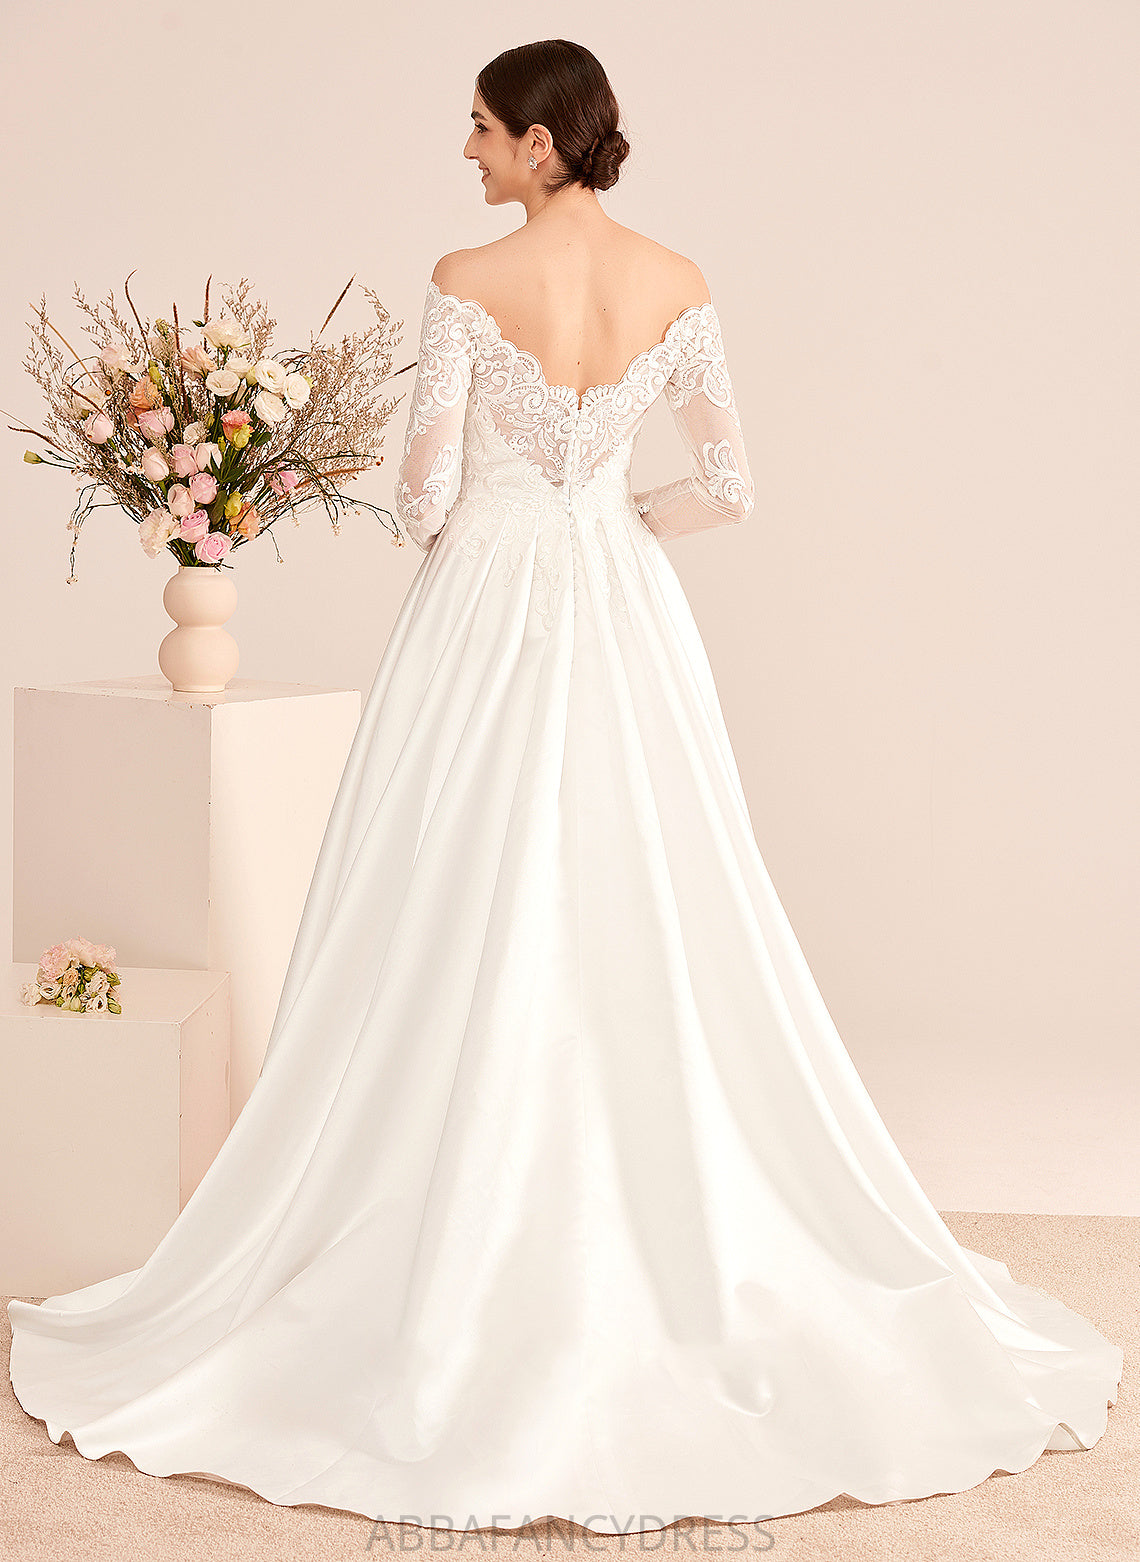 Dress Off-the-Shoulder Lace Ball-Gown/Princess With Wedding Train Wedding Dresses Court Elva